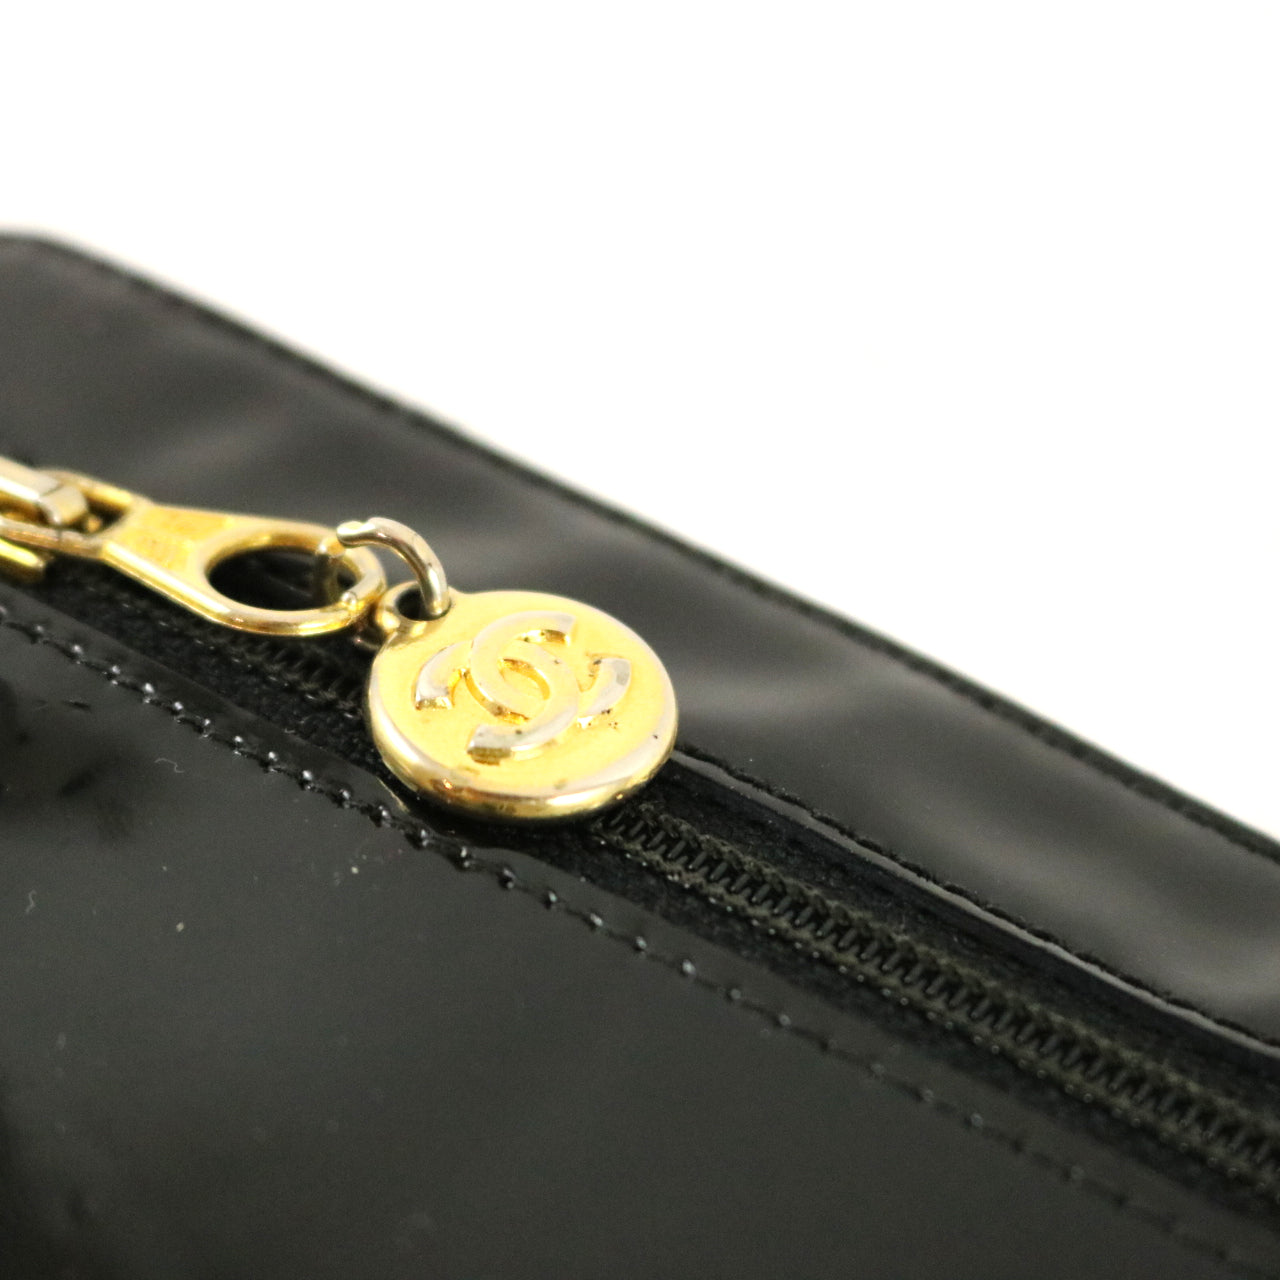 Timeless Patent Leather Continental Zipper Wallet